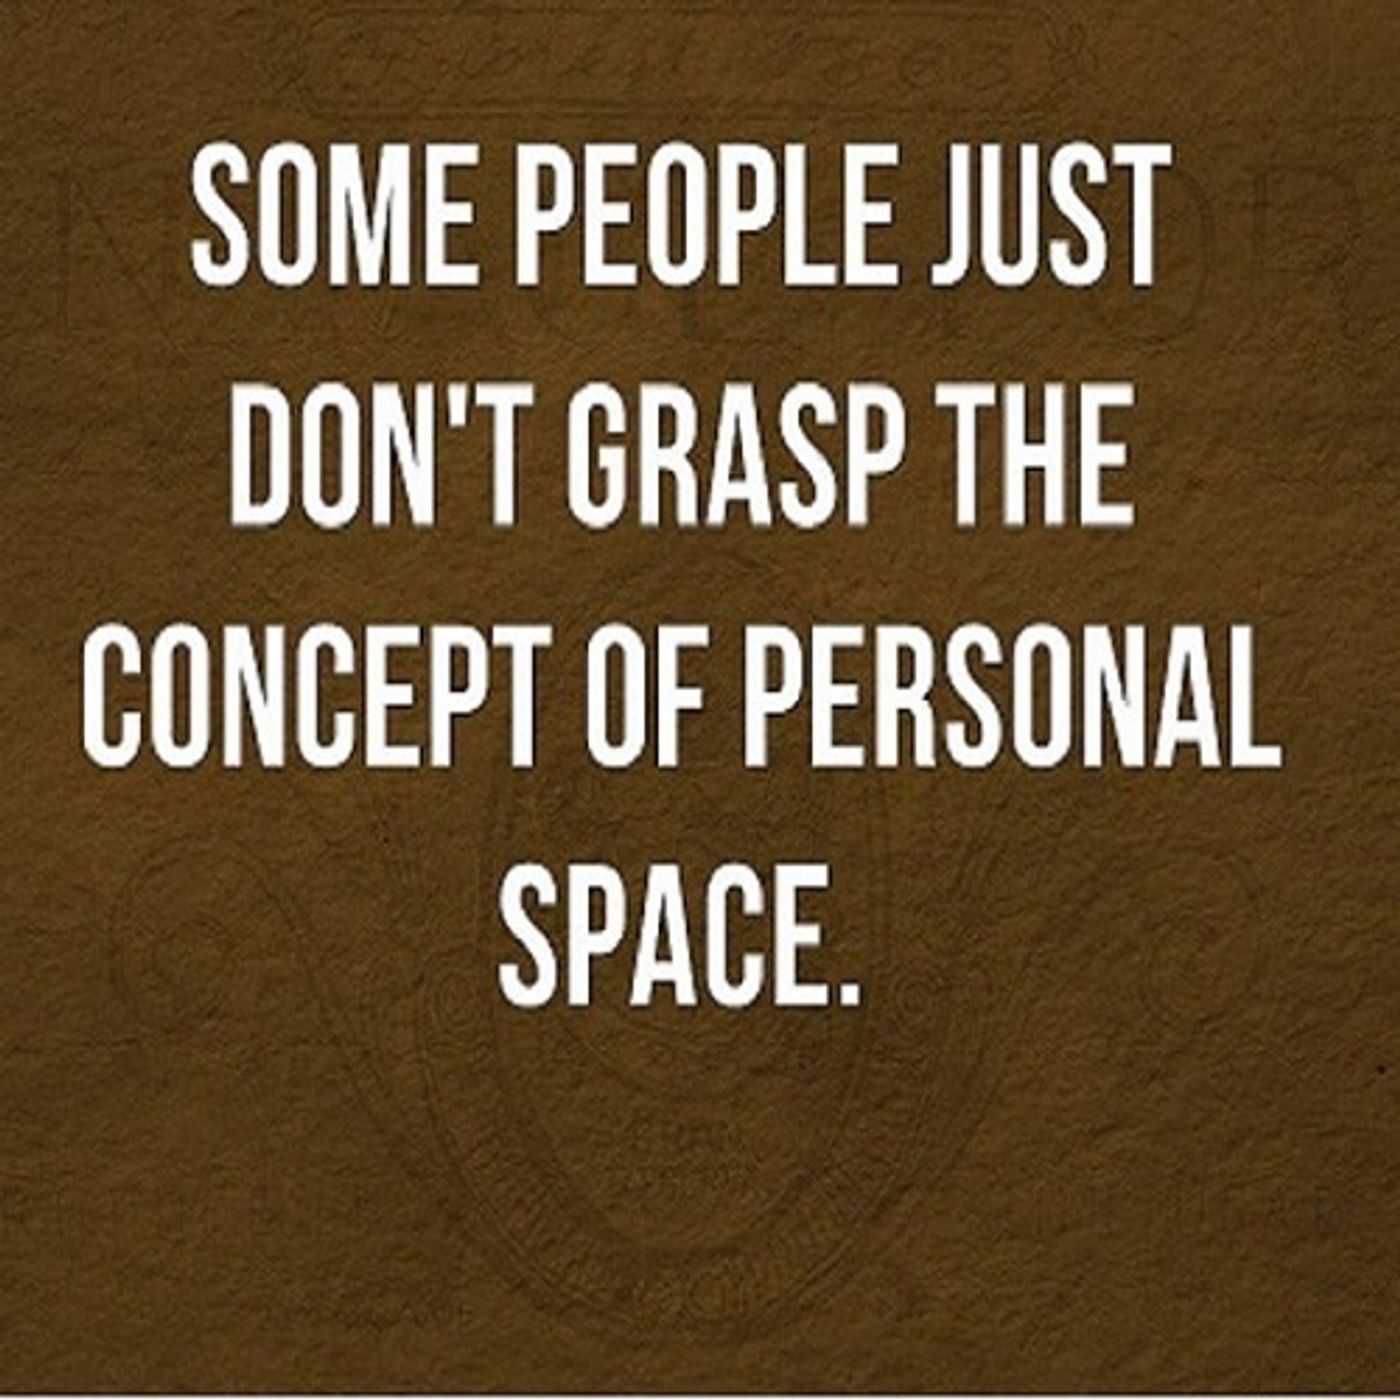 Personal Space, Some People Just Don't Get It...